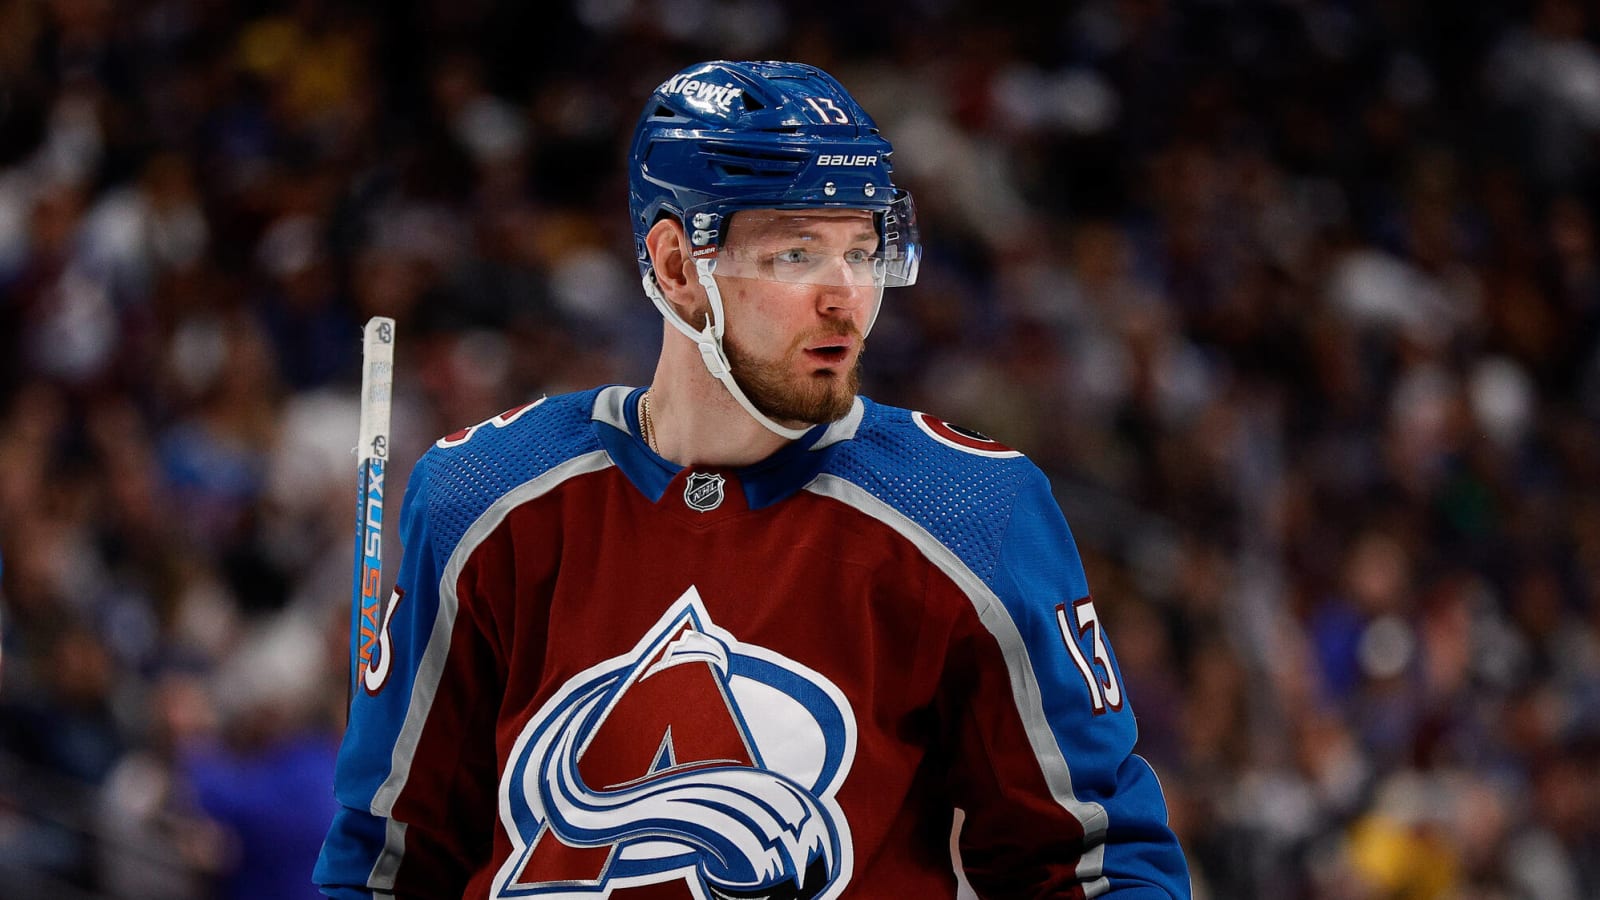 Colorado Avalanche forward Valeri Nichushkin out for 'personal reasons'